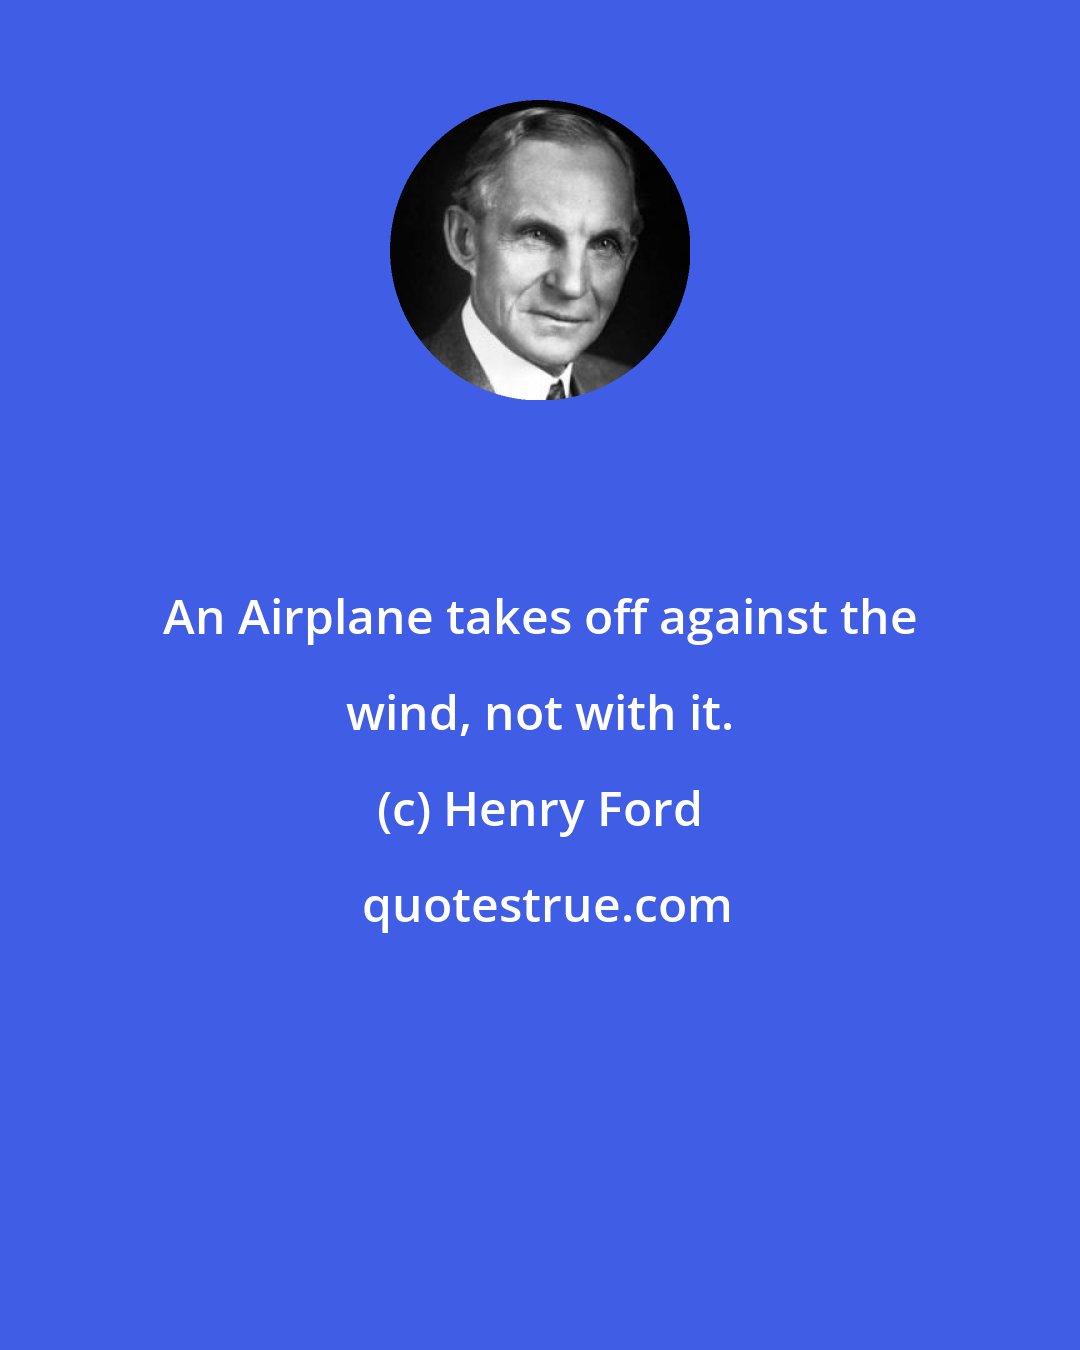 Henry Ford: An Airplane takes off against the wind, not with it.